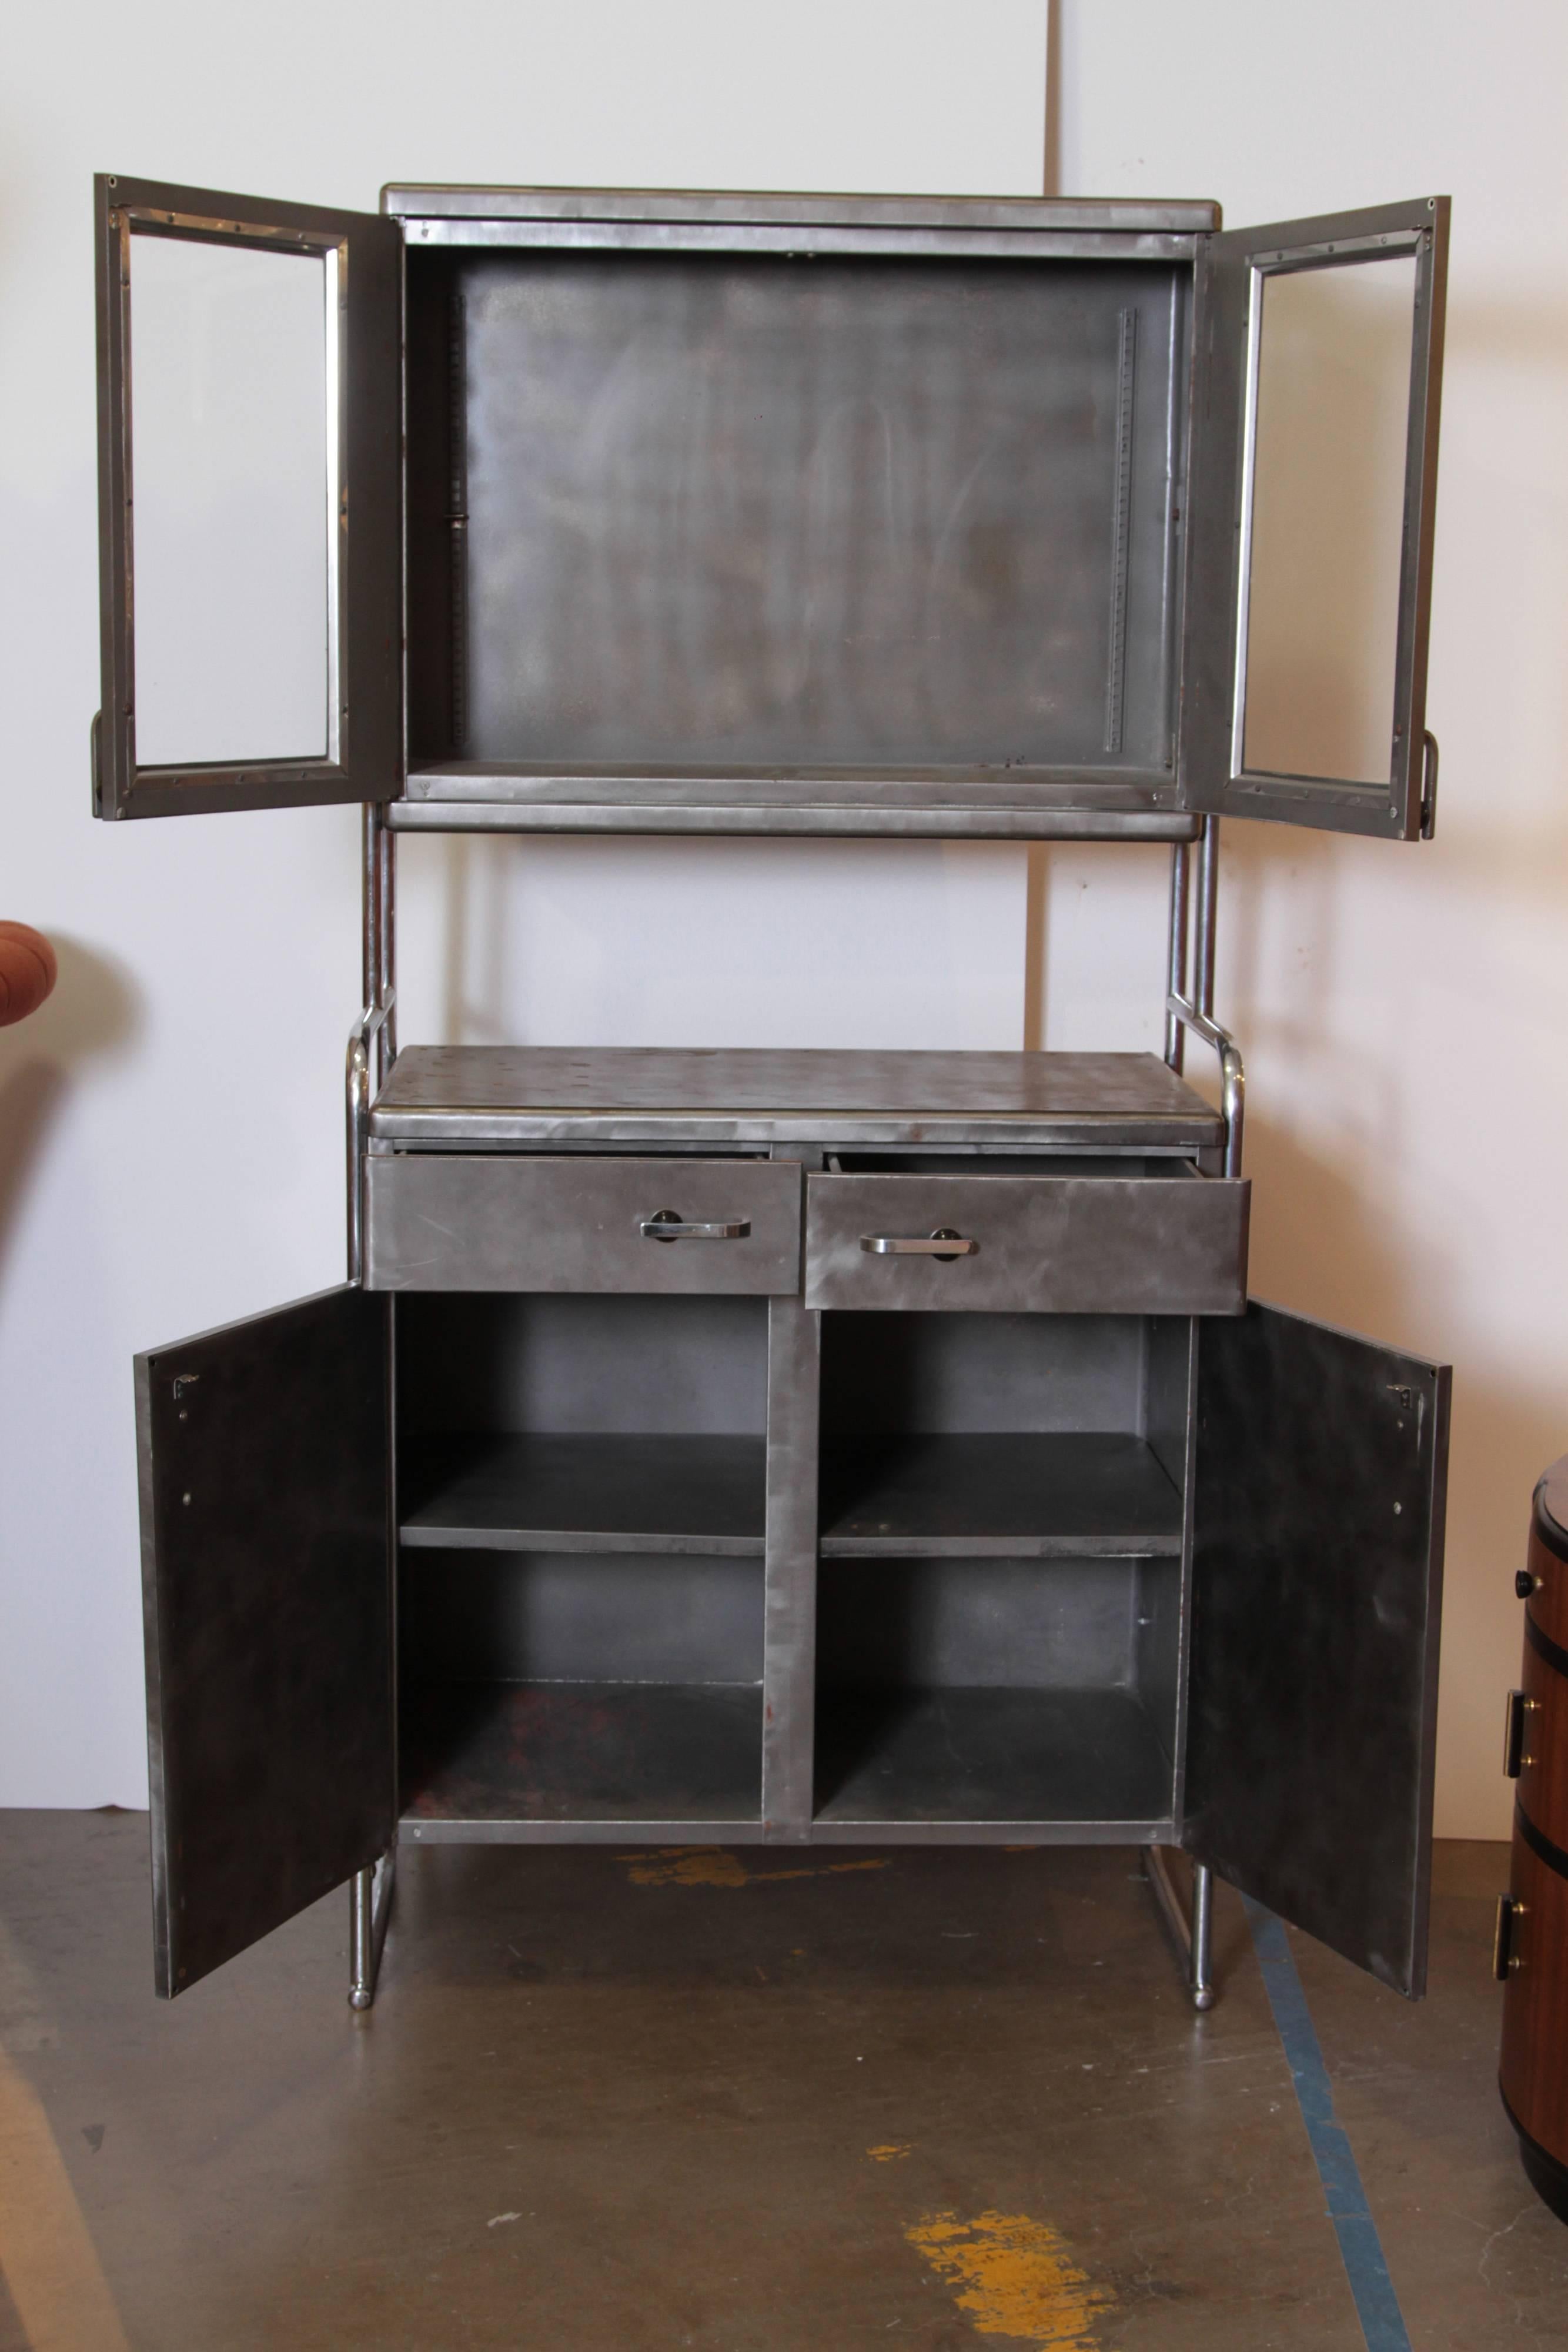 Art Deco Machine Age Wolfgang Hoffmann attribution, rare cabinet by Howell. Hoffman.

Unseen in market: Rare medical / Industrial dual - cabinet tall - boy storage / display unit.
Cases stripped to bare steel at some point.

In our opinion;